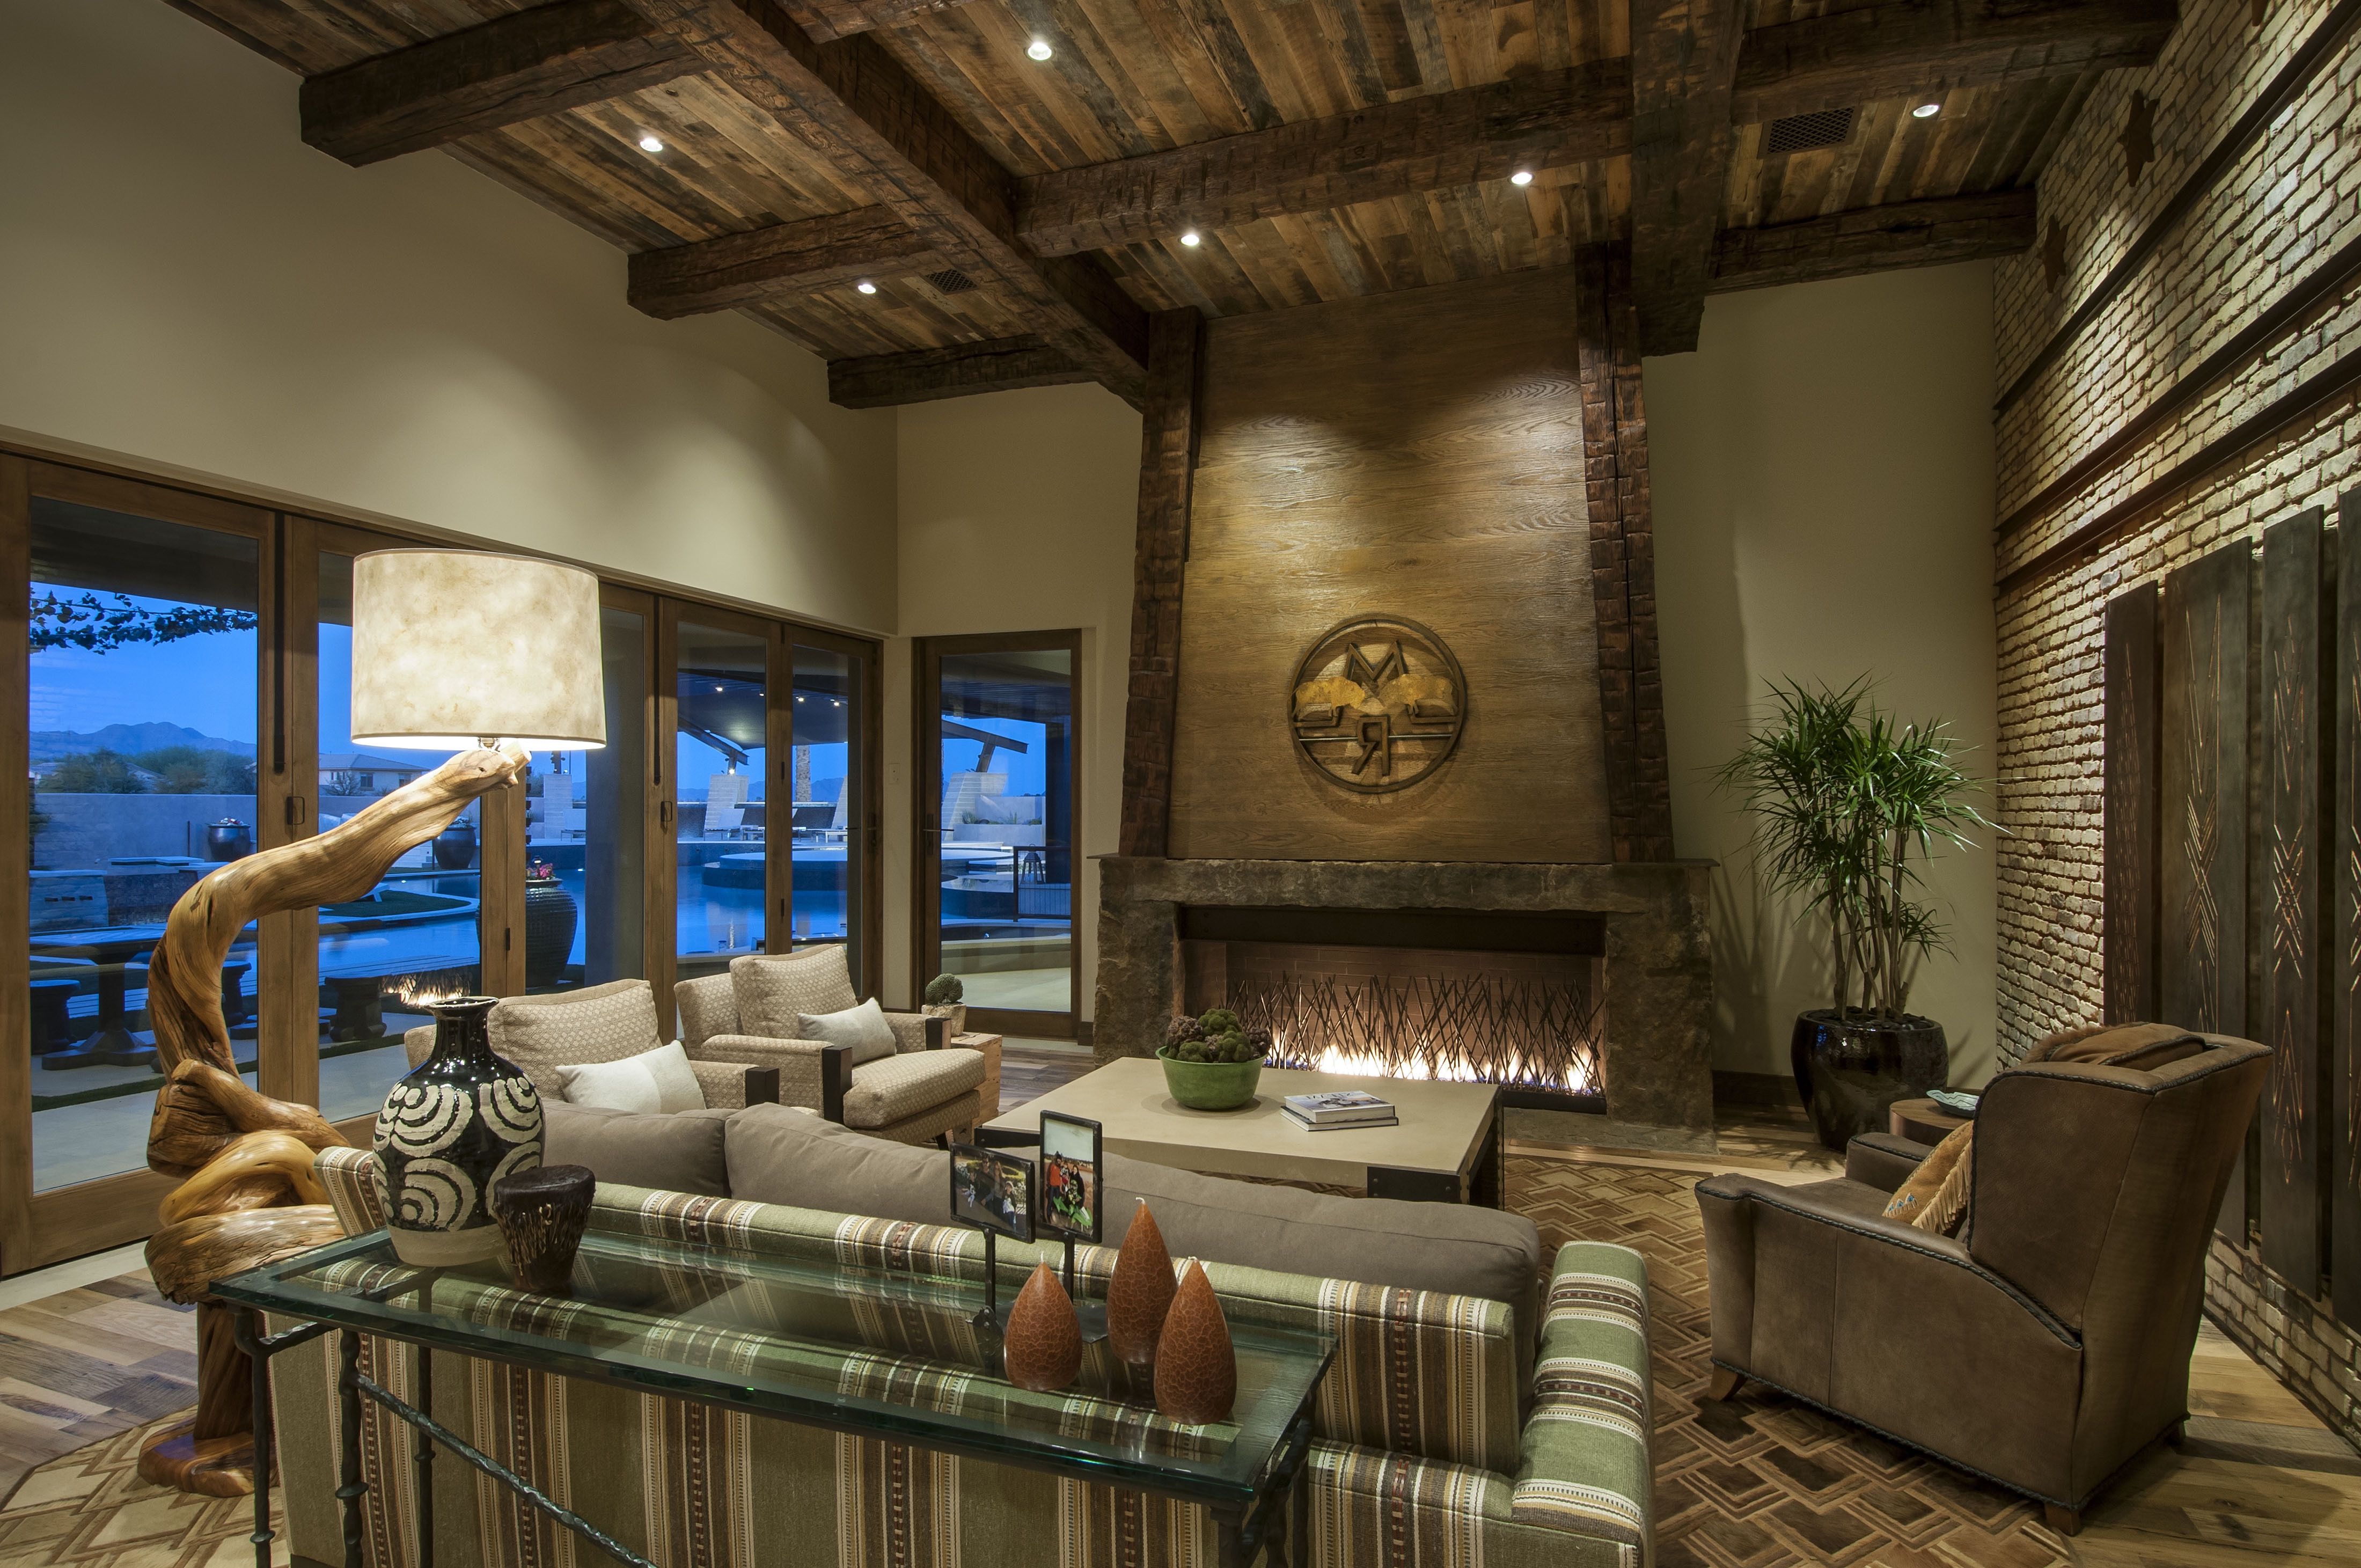 Large Western Living Room With Rustic Wood Ceiling (View 13 of 18)